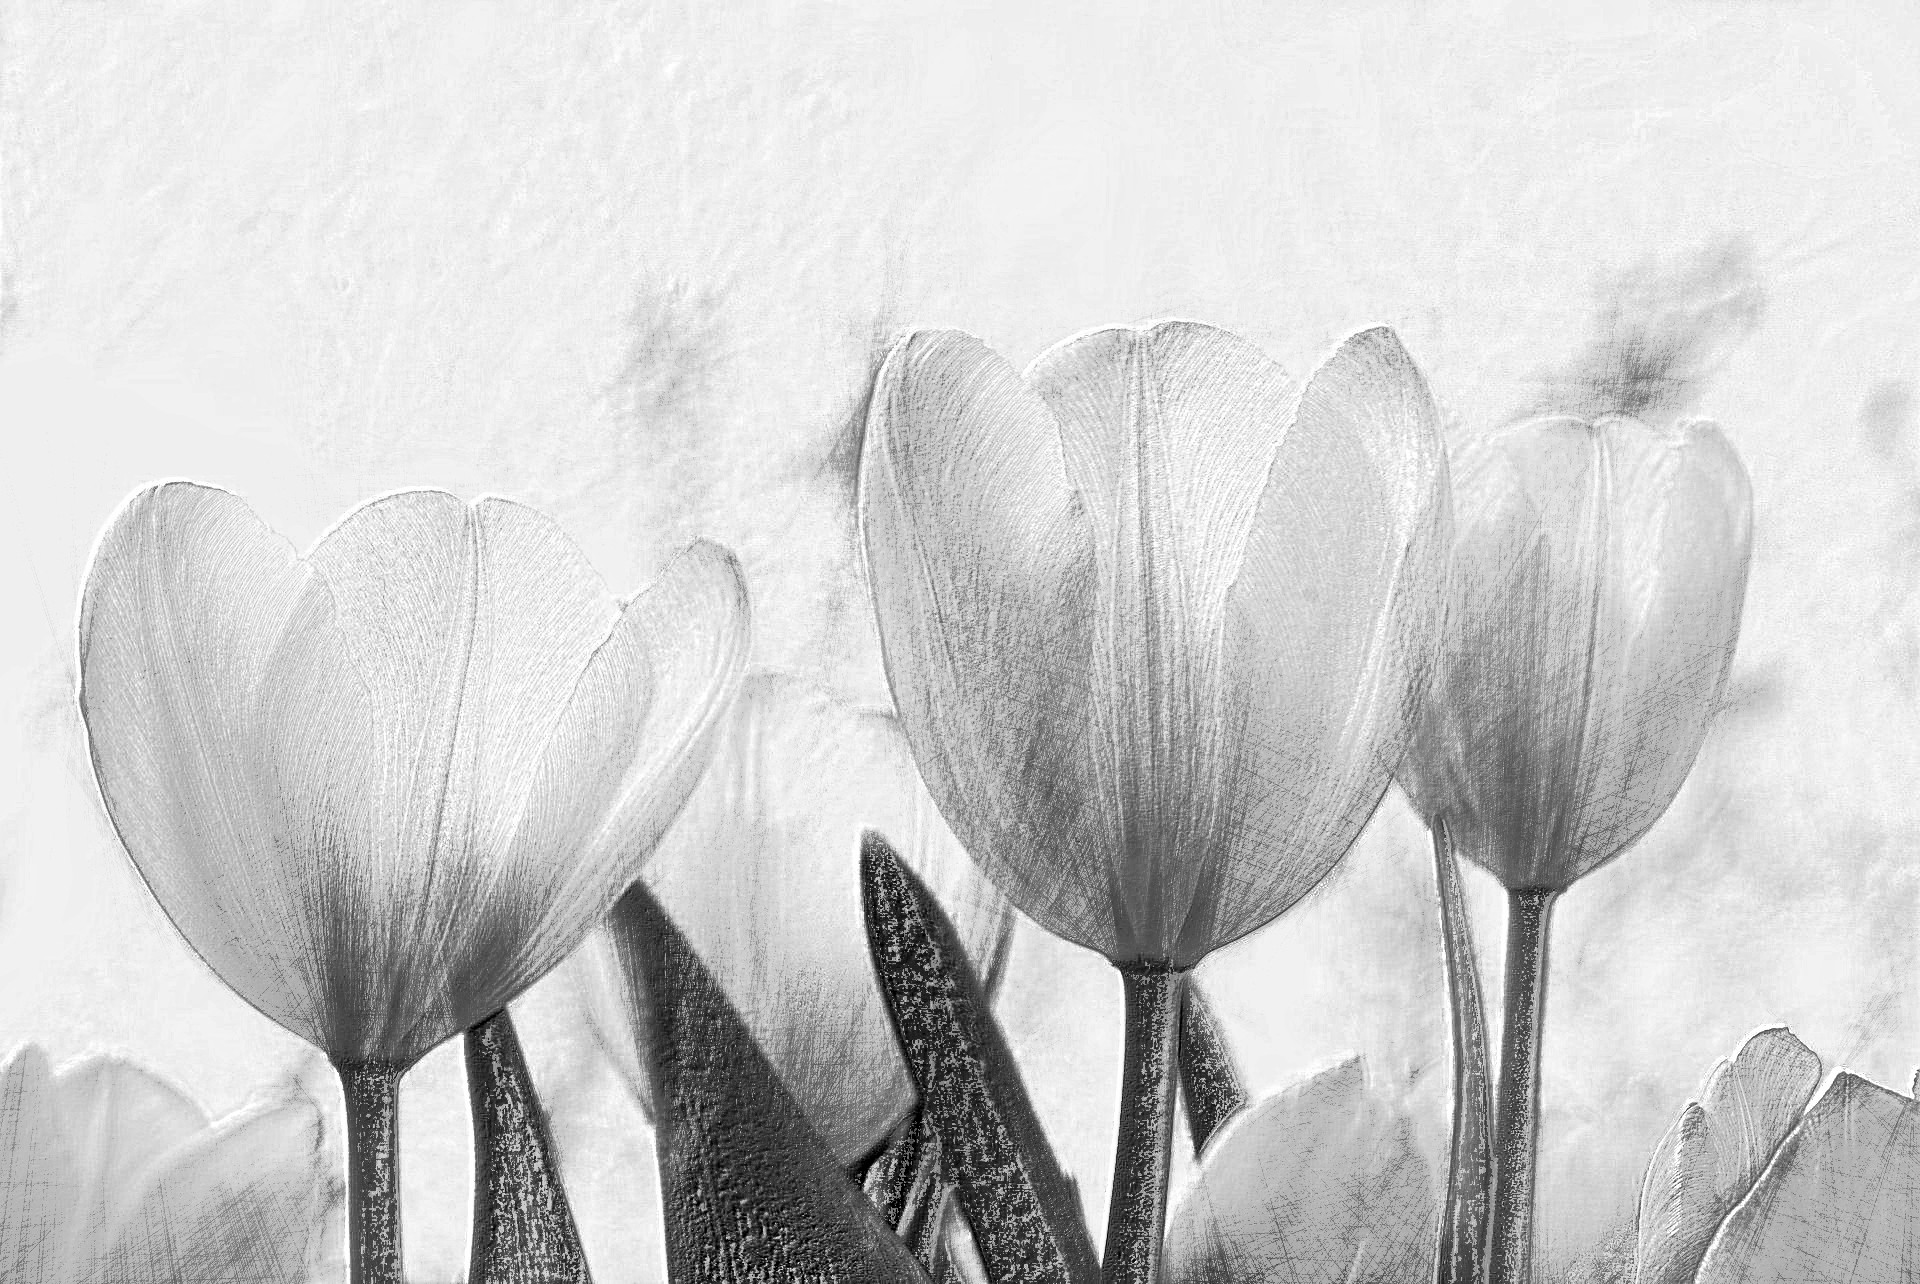 2020-08-22 12-10-12nature-3263198_1920 with a draw on black effect, using option B&W and pencil lead=HB.jpg